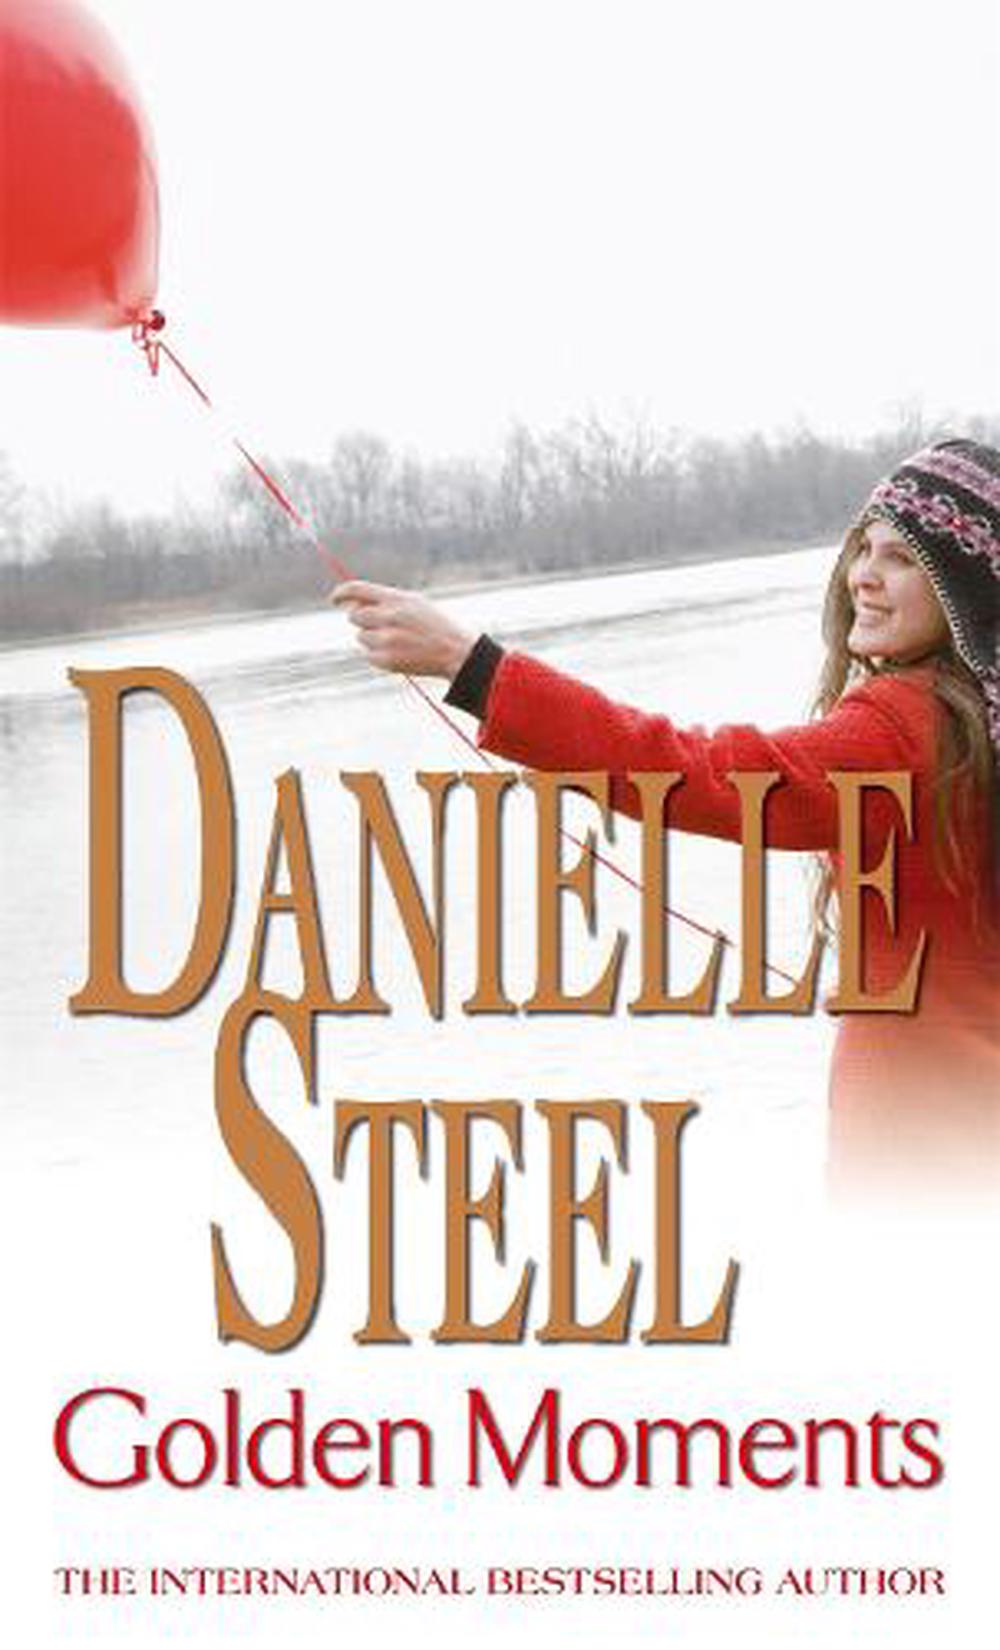 Golden Moments by Danielle Steel (English) Paperback Book